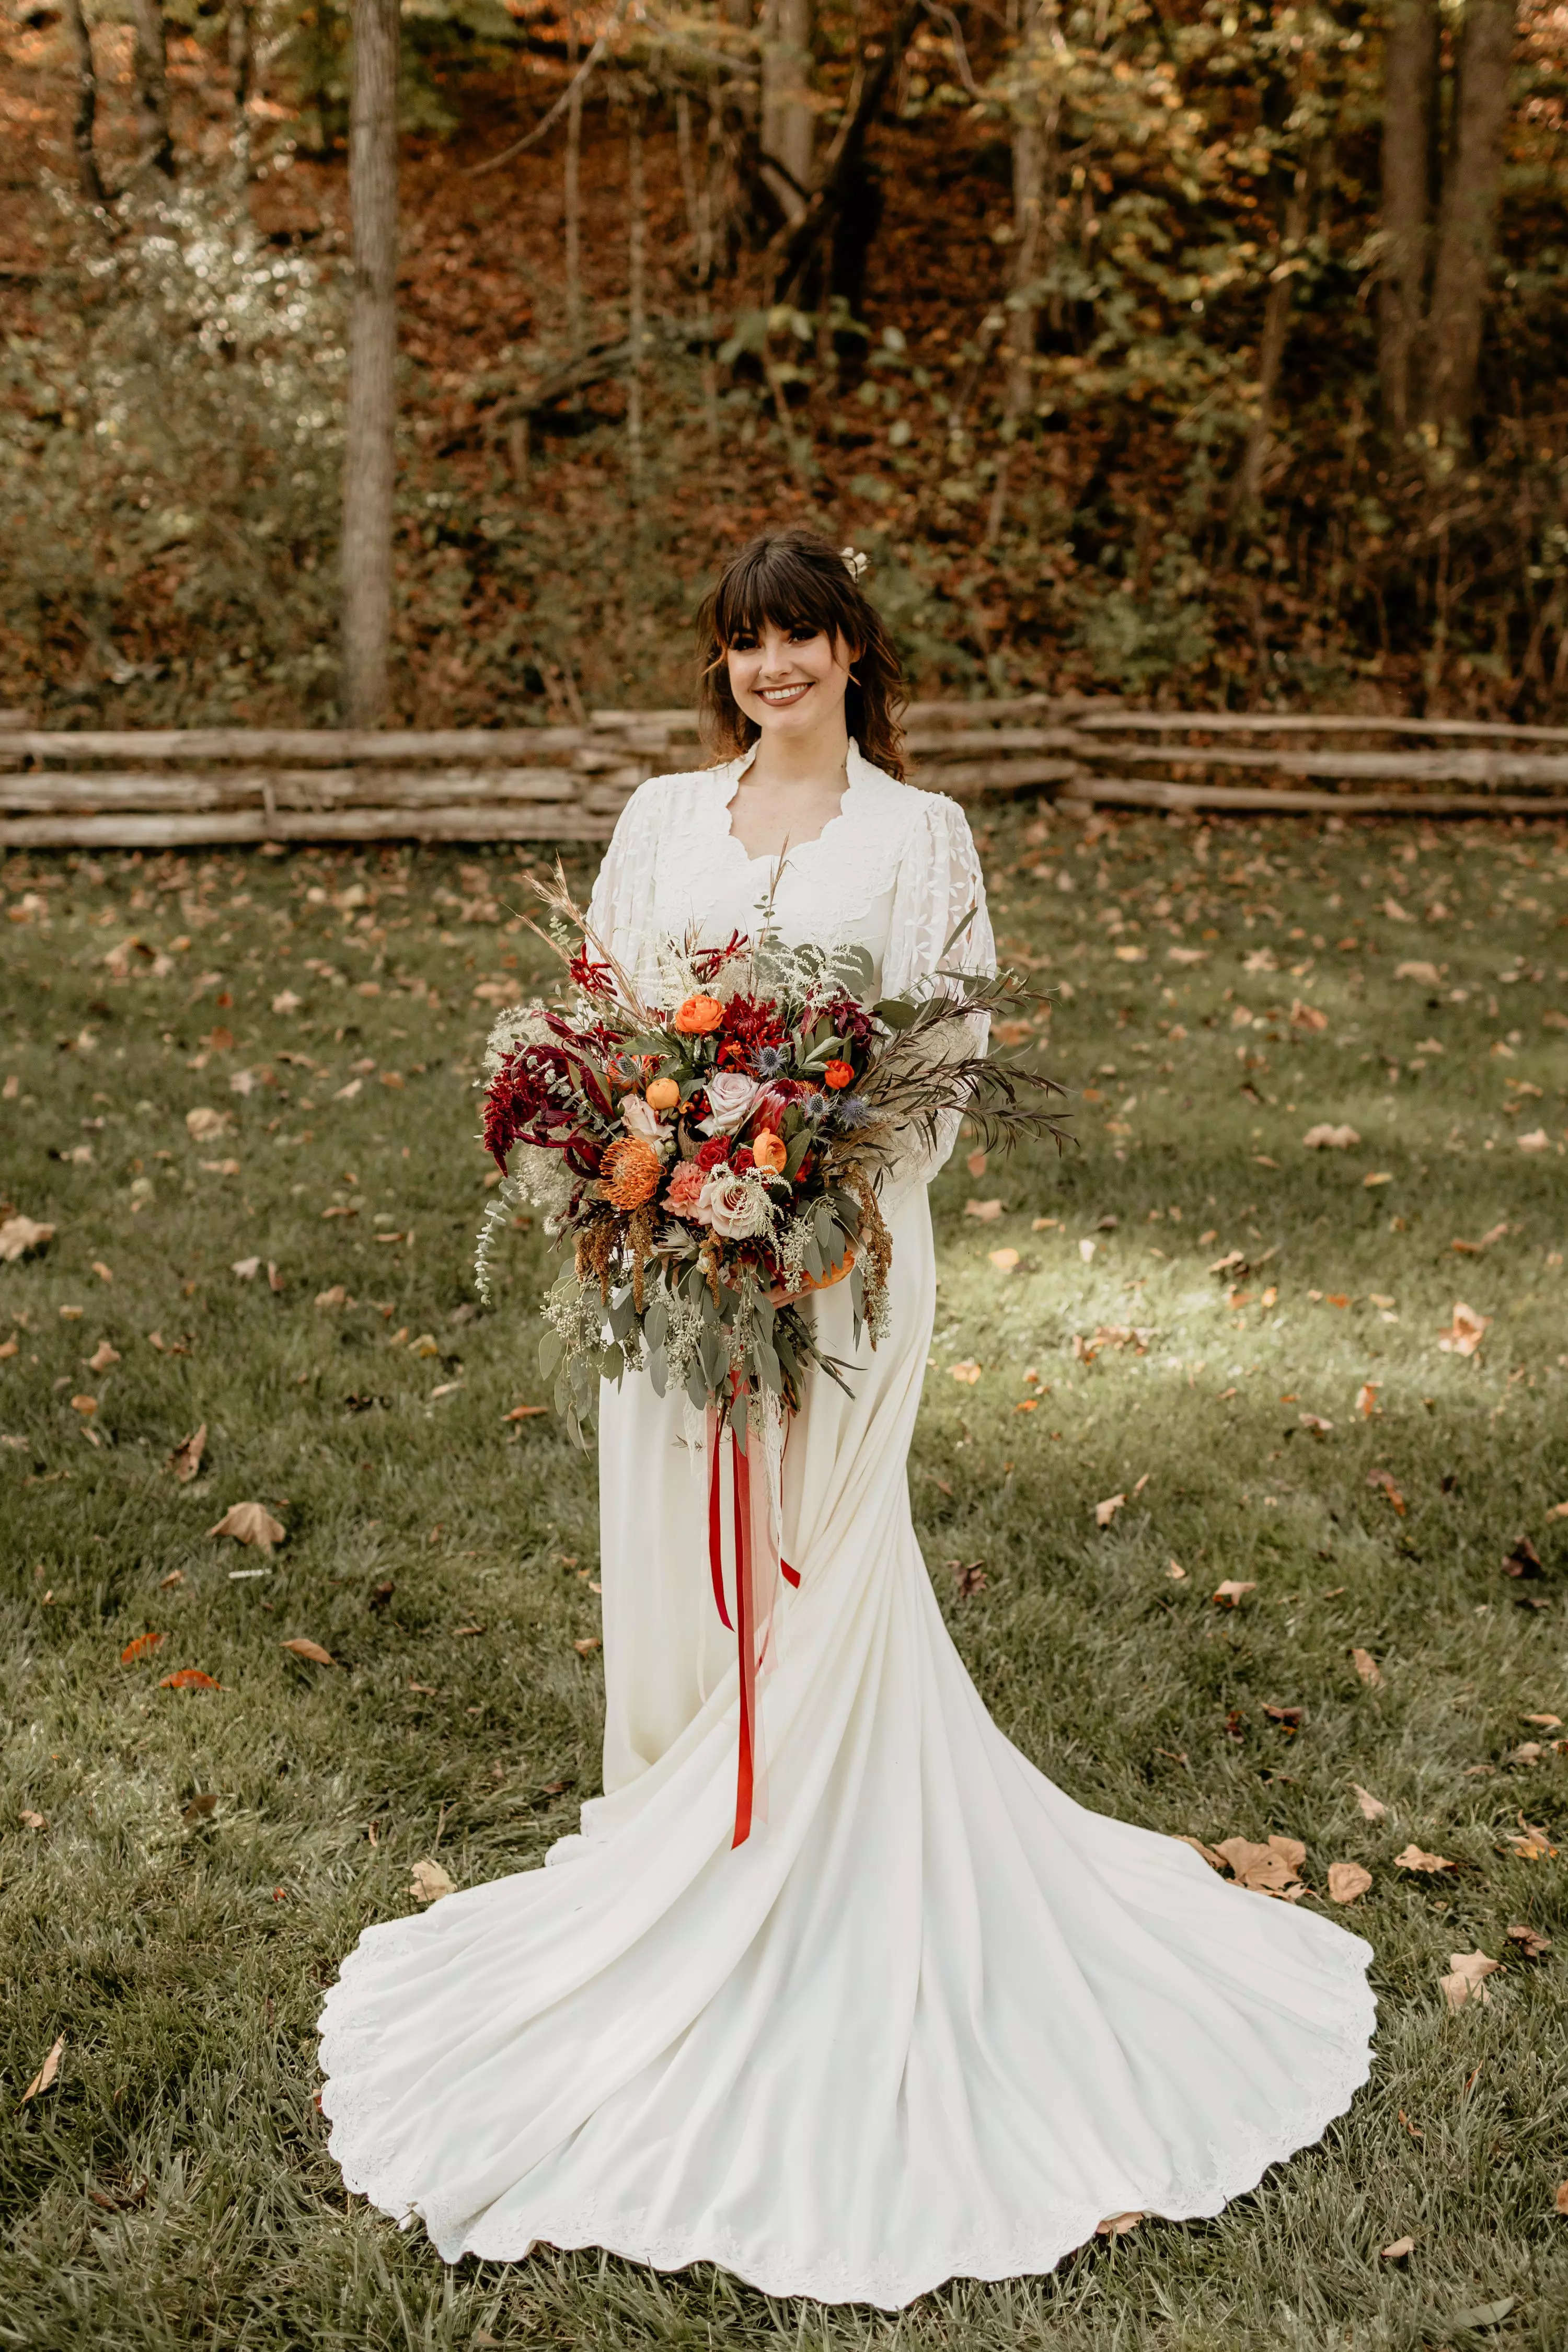 Vandergriff had help from her mom and grandmother to make her dream wedding day look come to life.